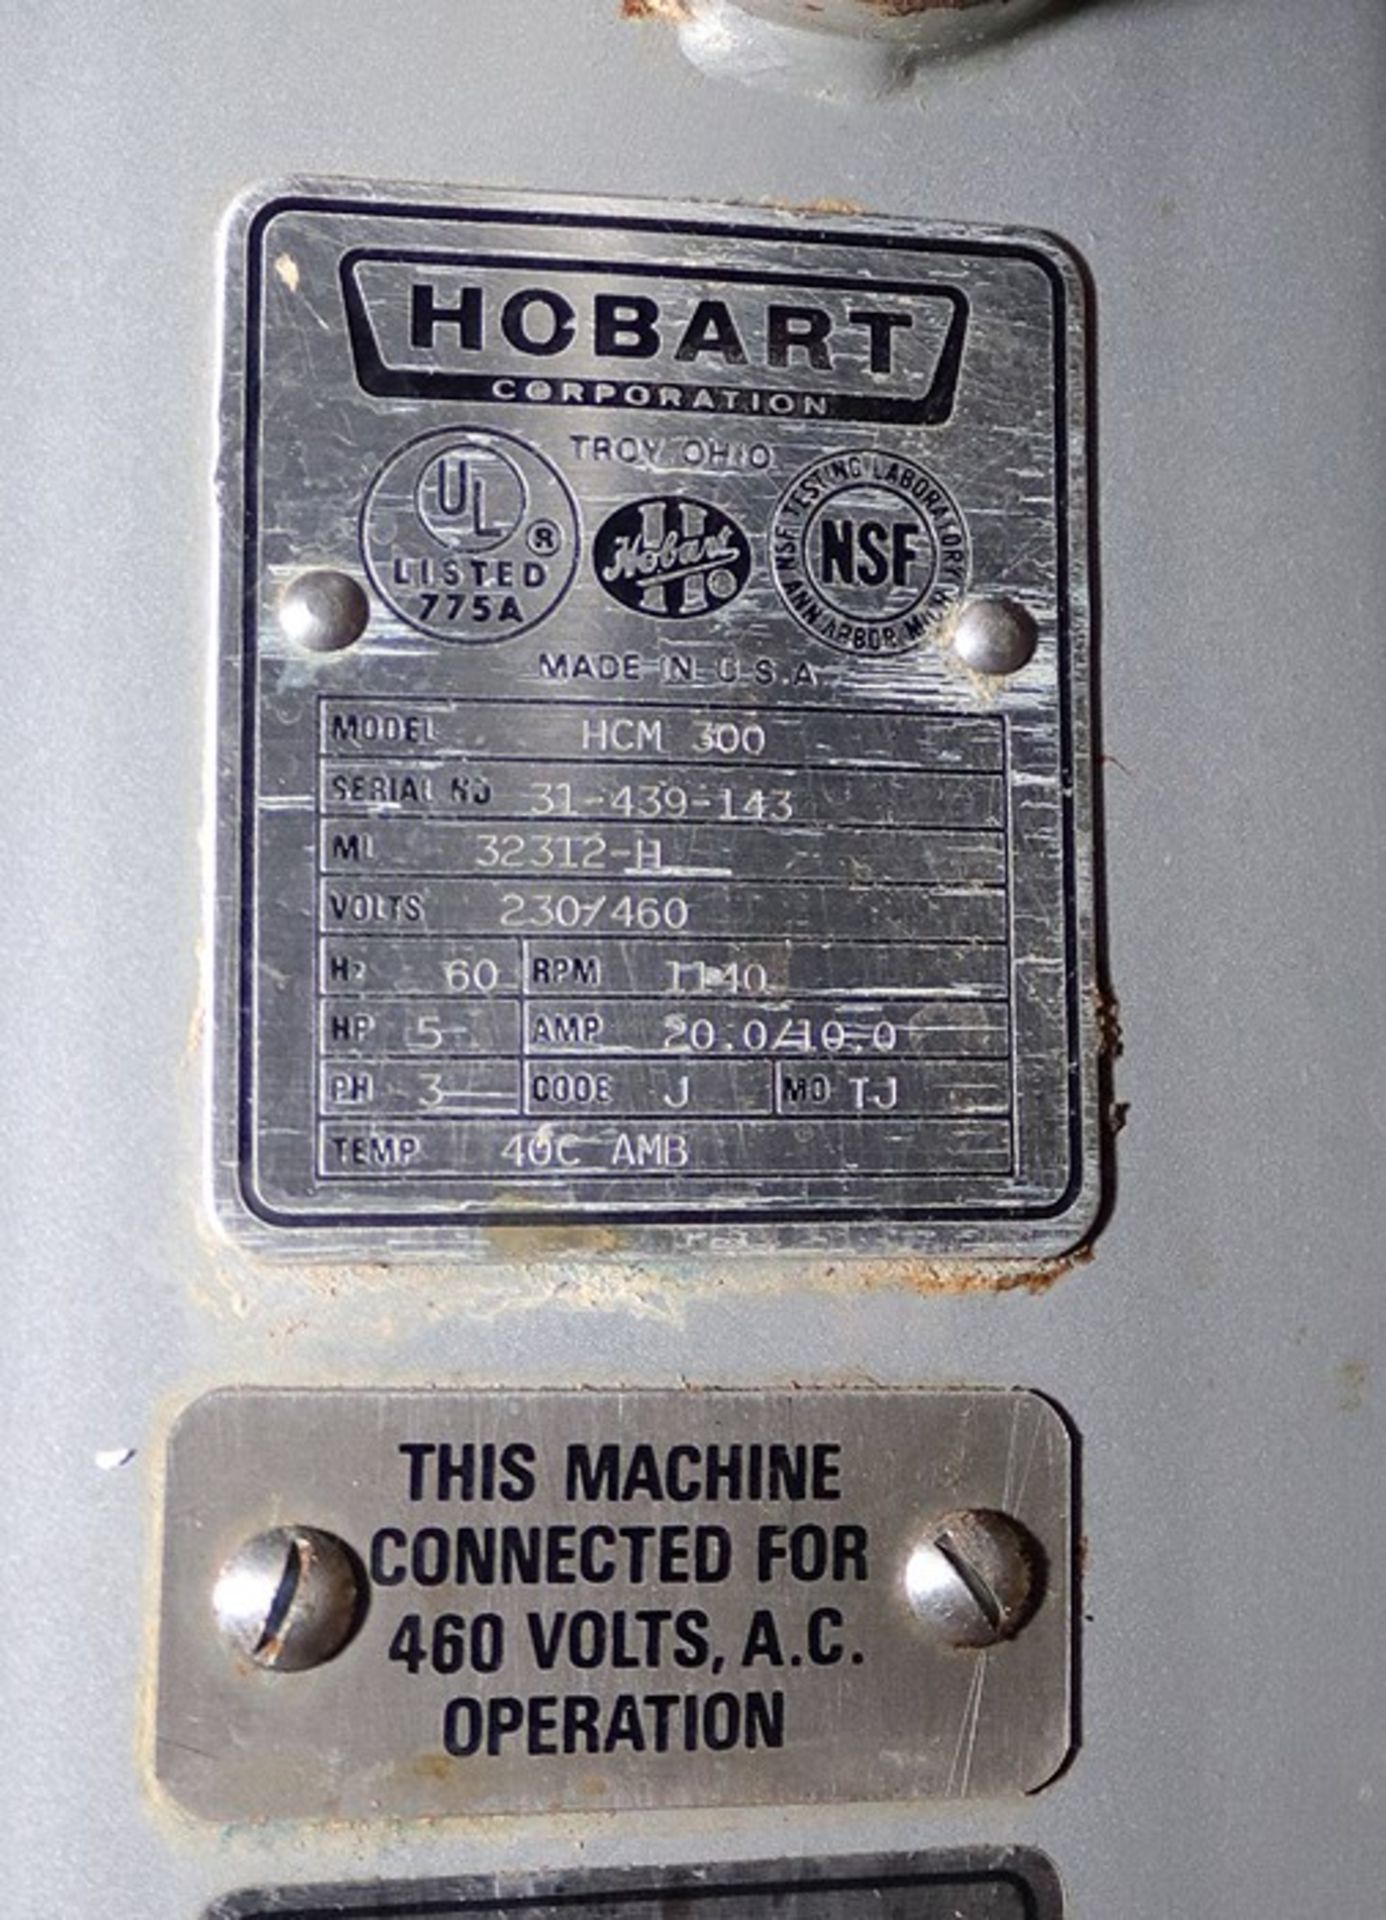 Hobart Commercial Cutter Mixer with tilting bowl, Model HCM300, 3-phase - Image 3 of 4